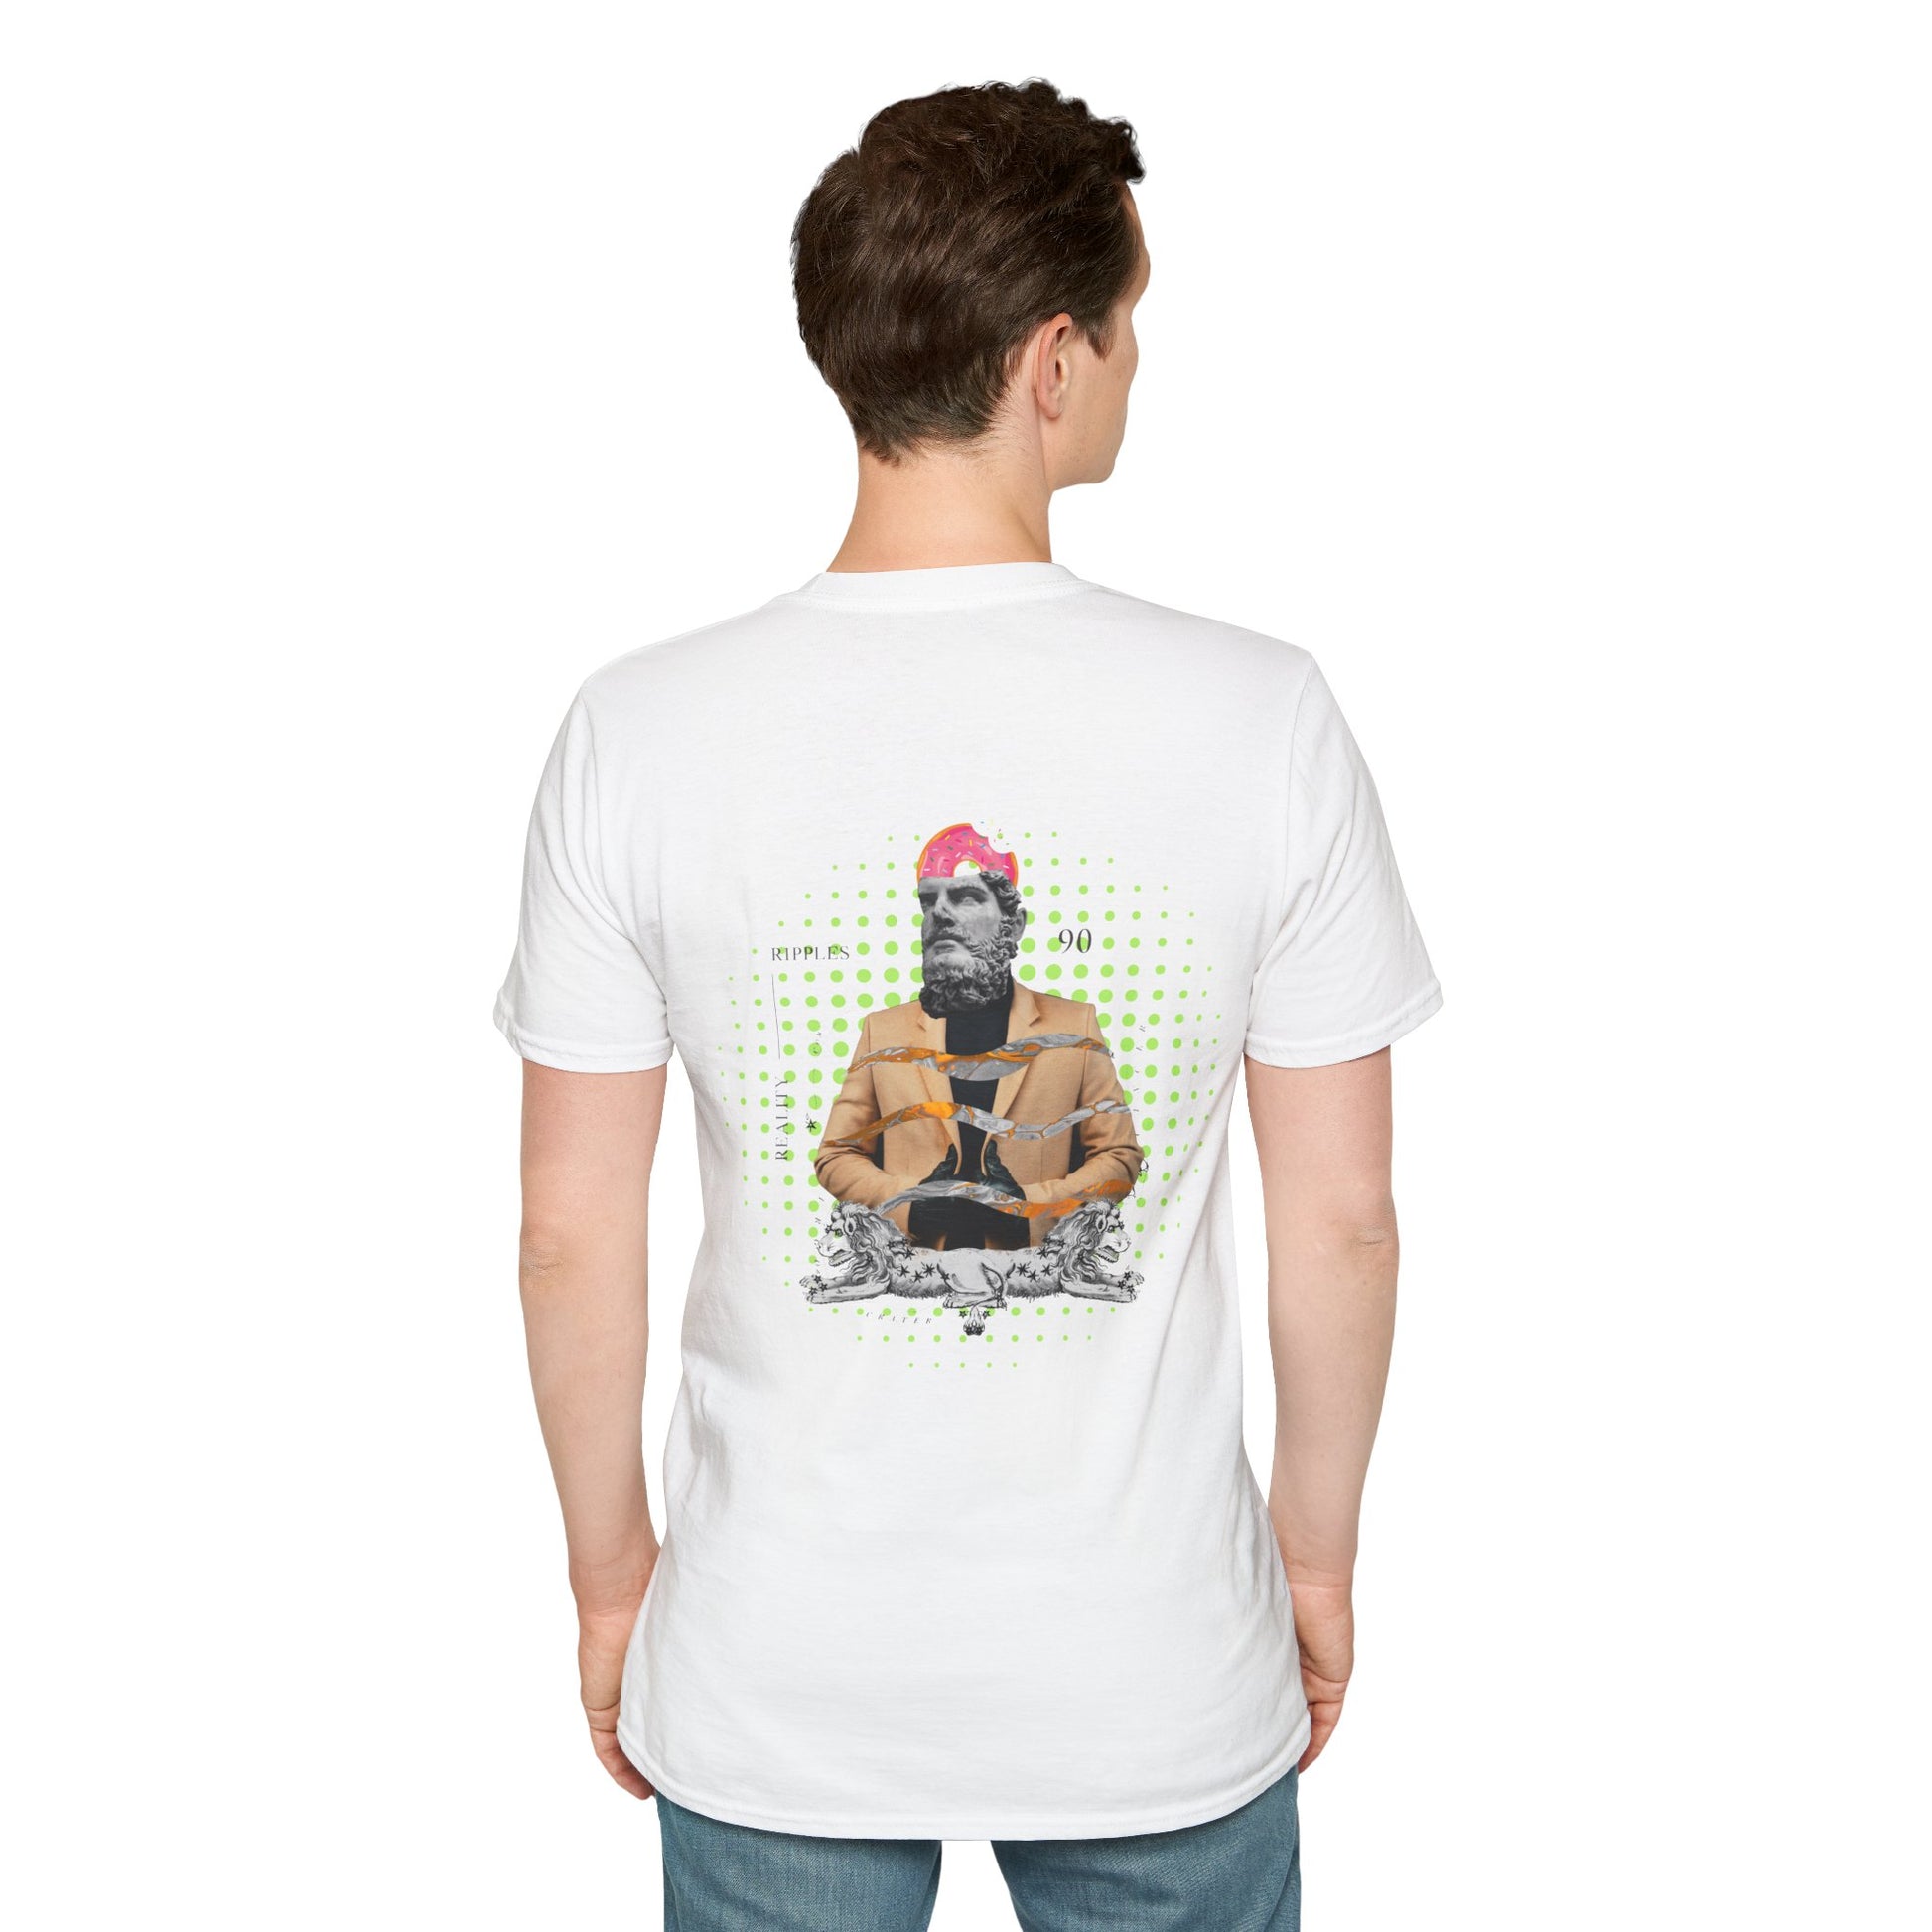 White T-shirt featuring a collage of a Greek statue head with a modern glitch art twist